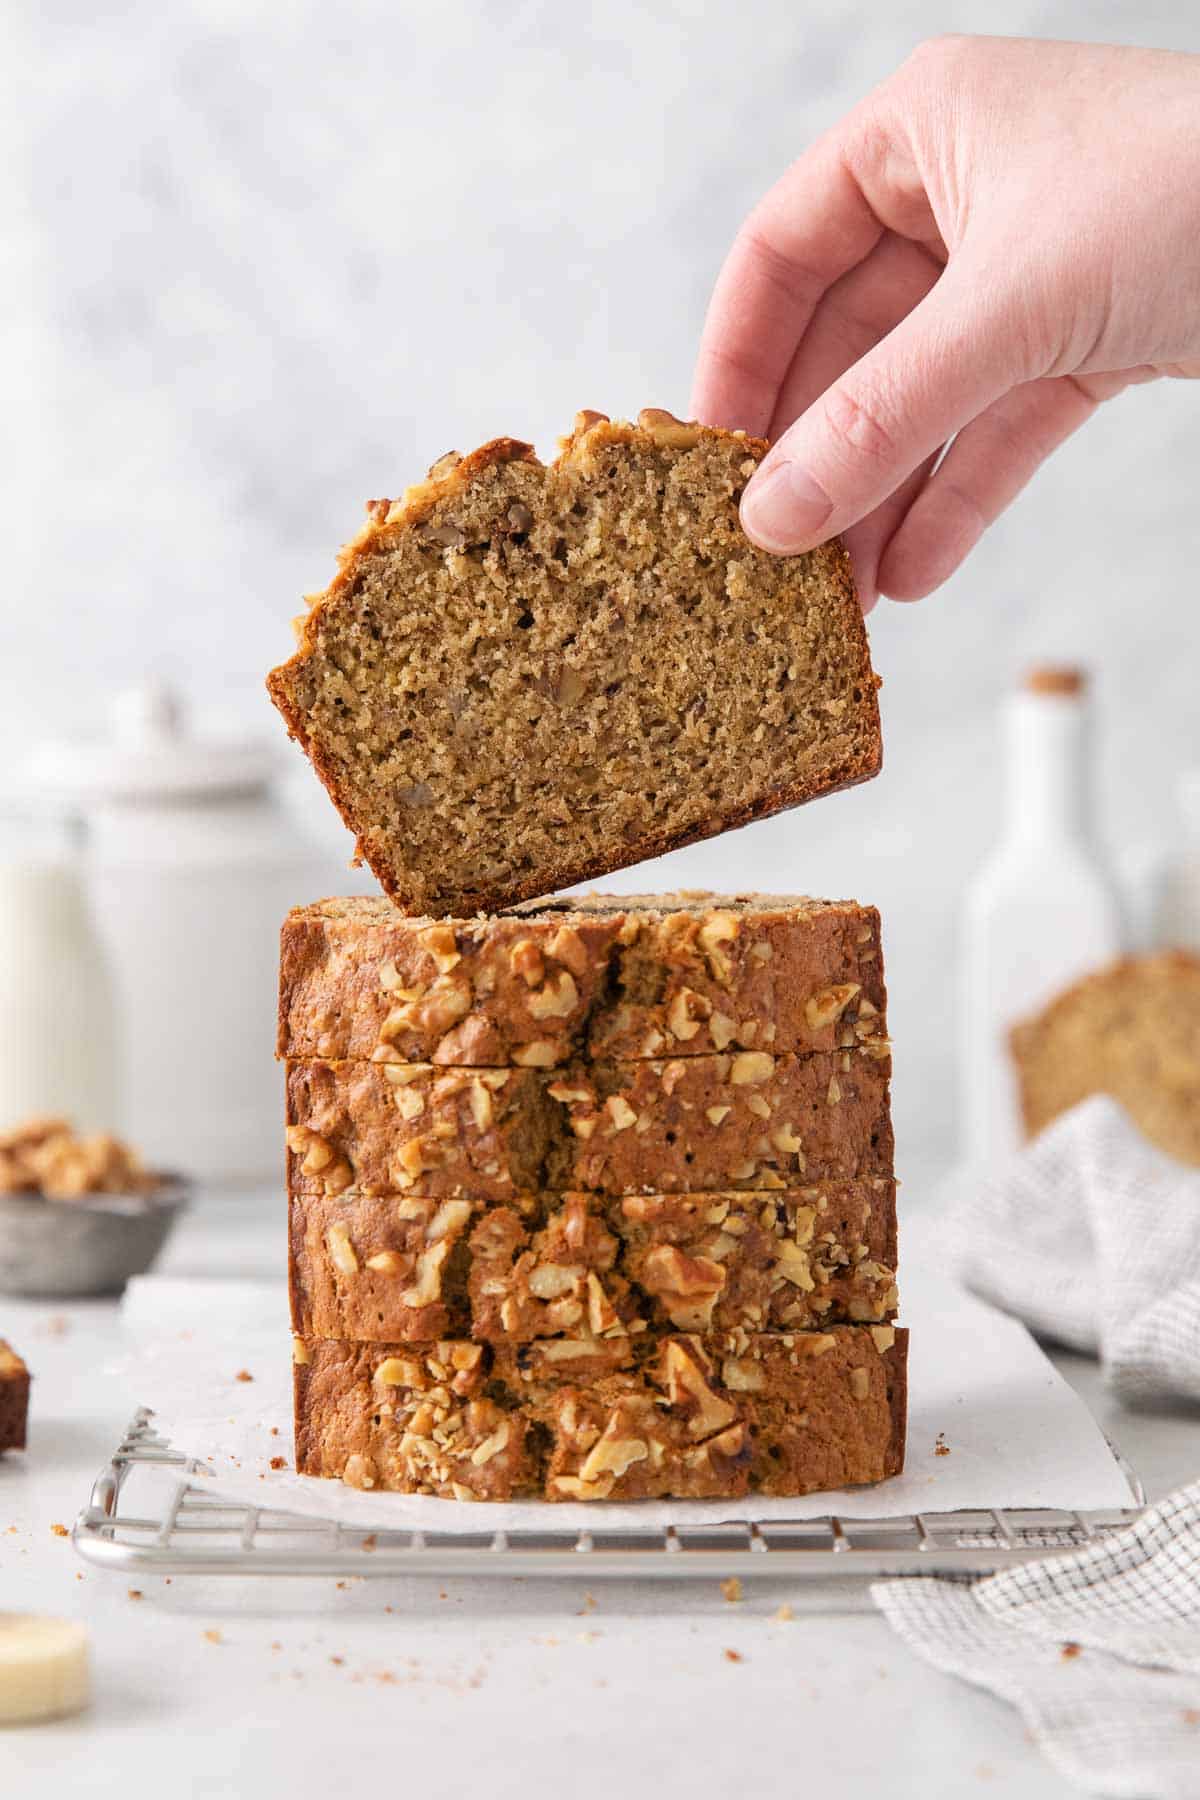 A hand picking up a slice of oat flour banana bread